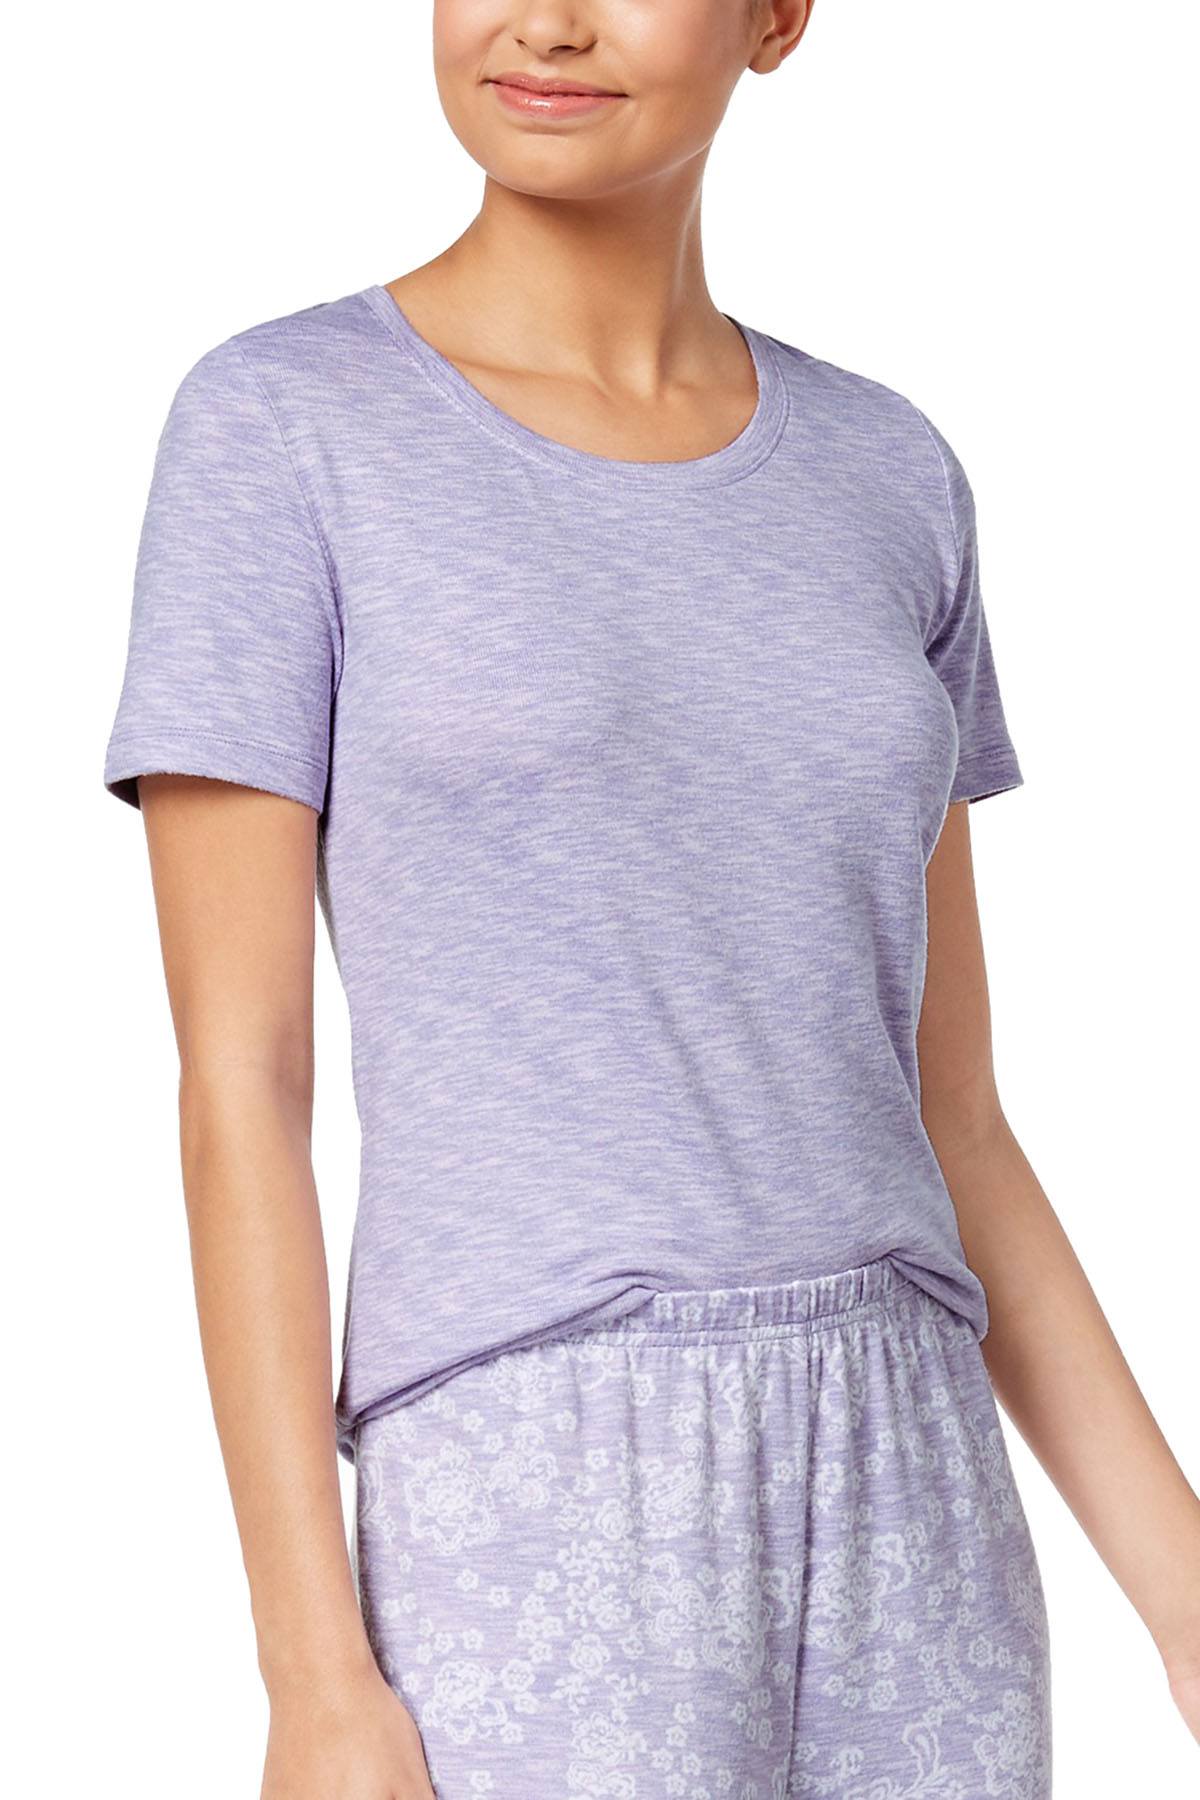 Charter Club Intimates Lovely-Lavendar Super-Soft Lounge Top